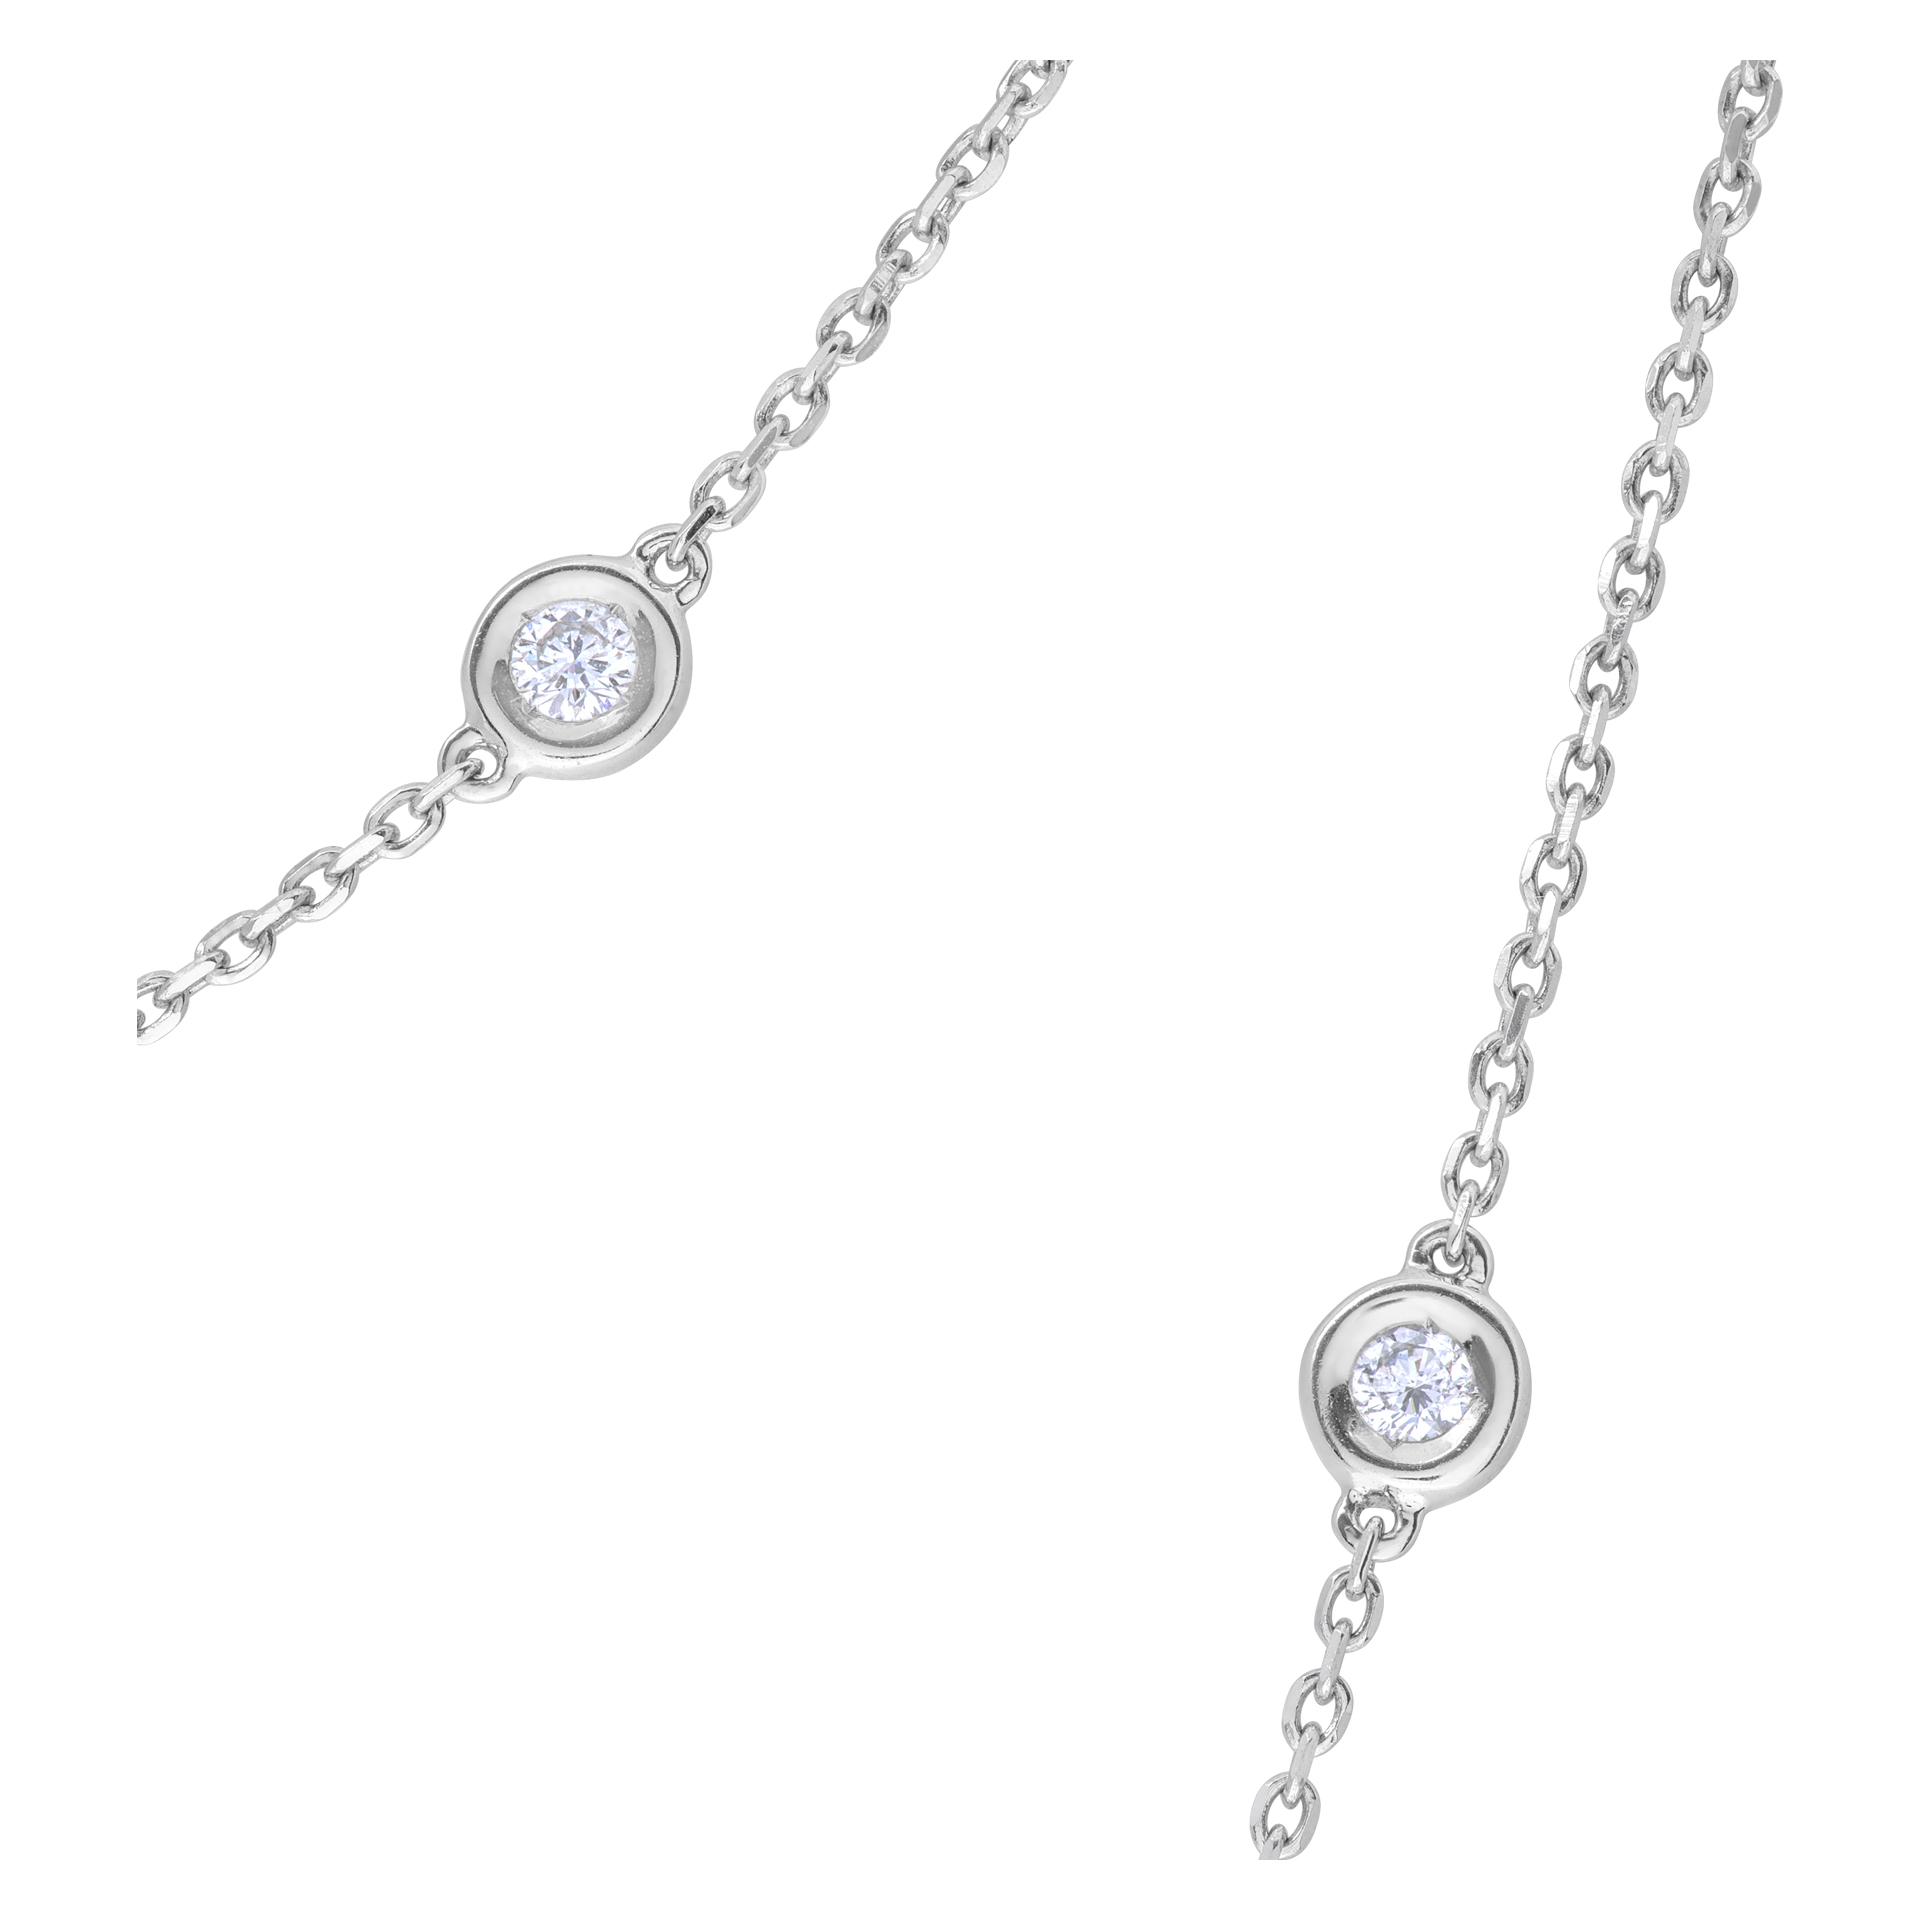 Diamonds by the yard necklace in 14k white gold image 1